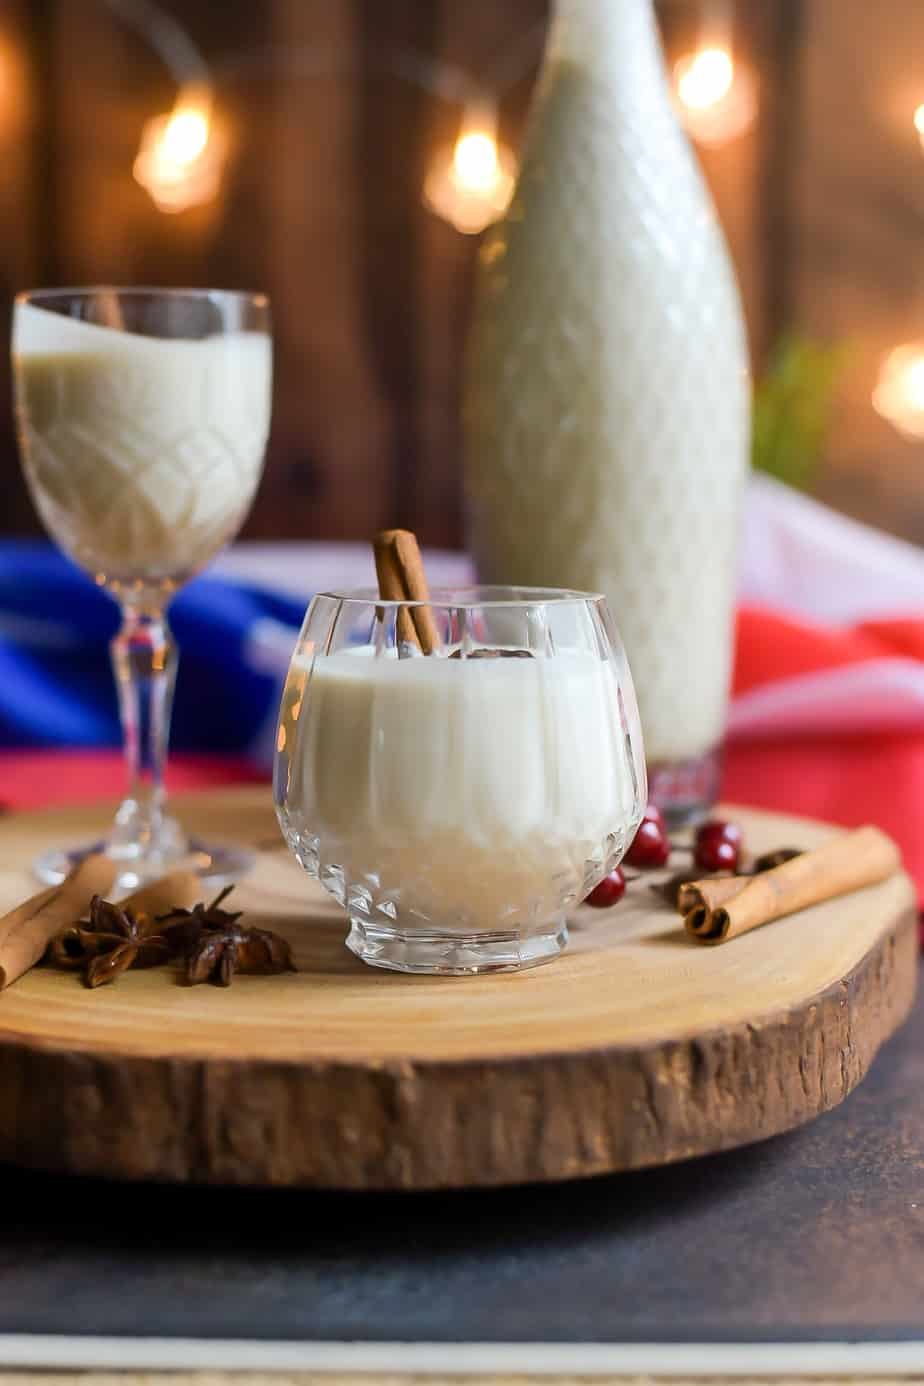 How to make Coquito – Puerto Rican Nog.

